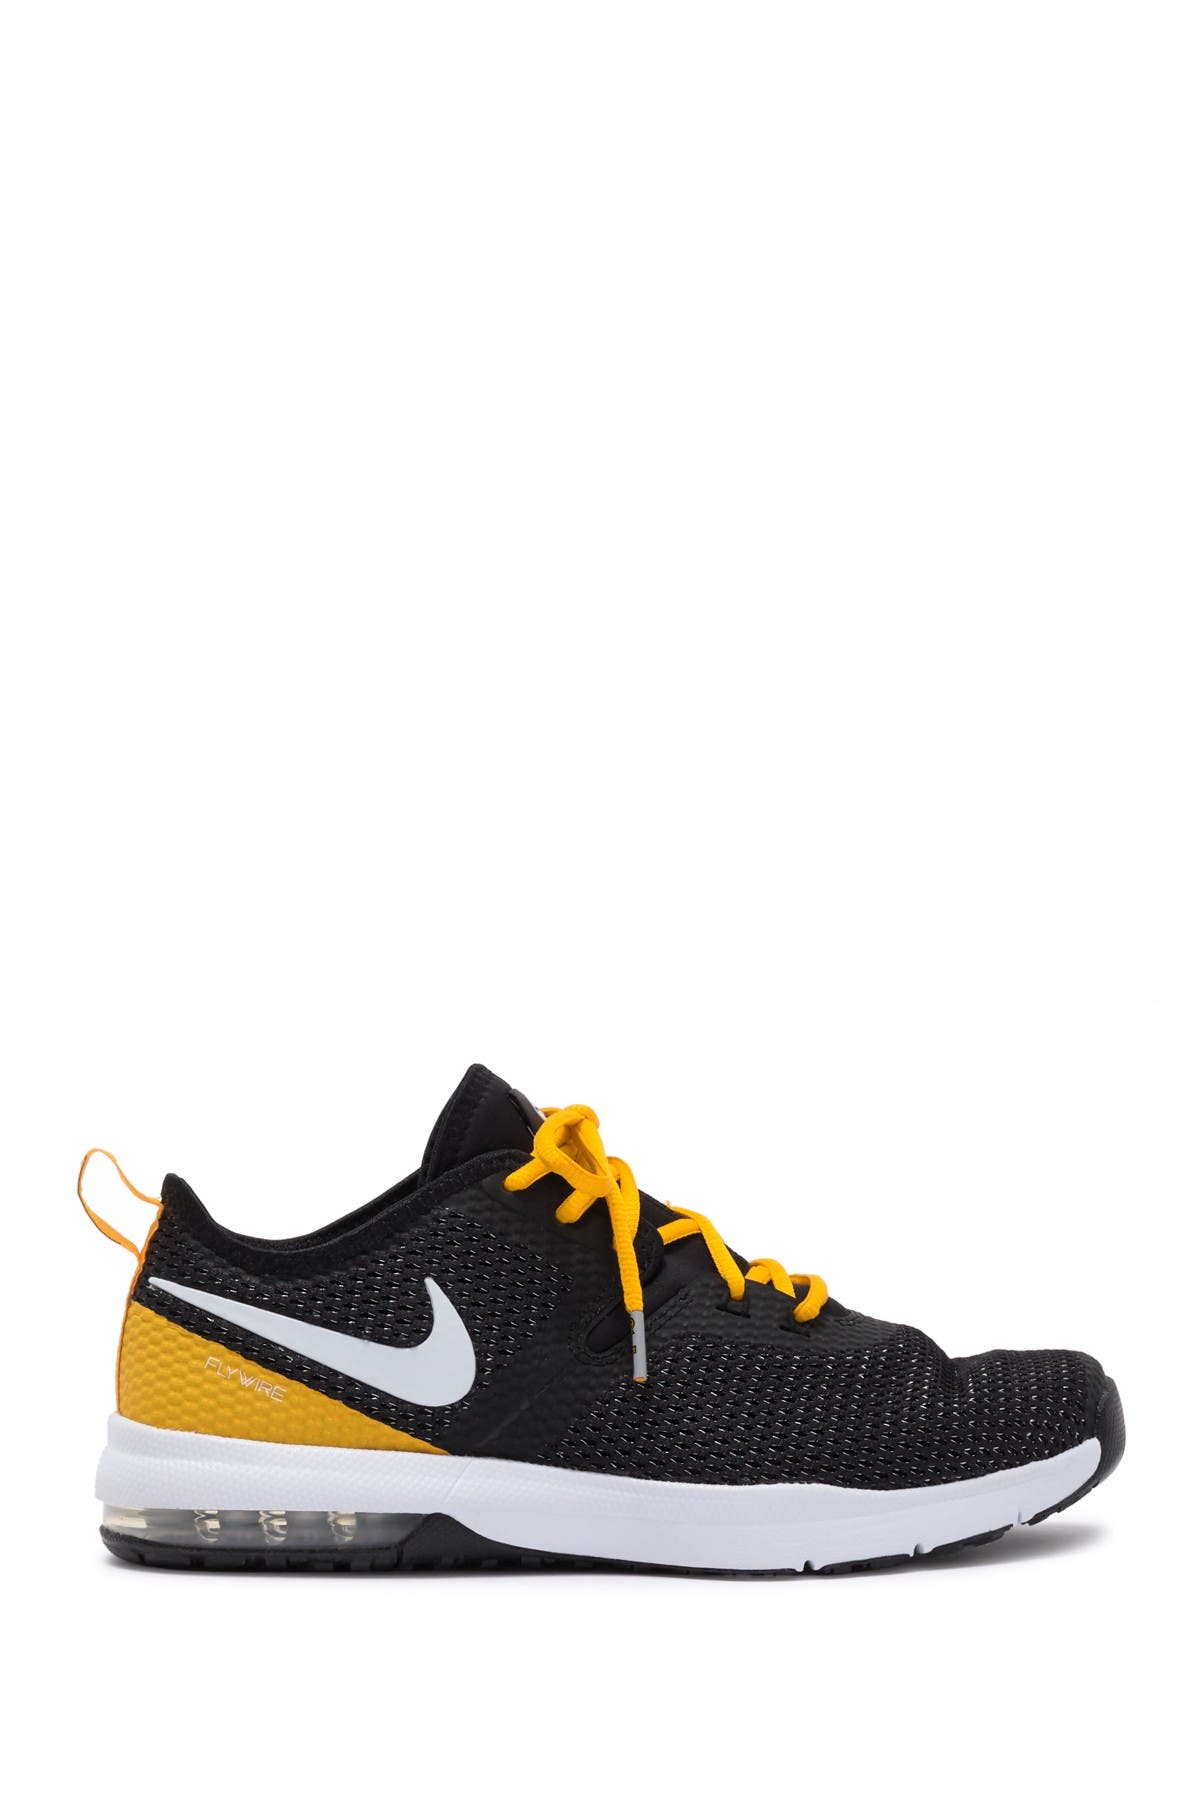 pittsburgh steelers nike air max typha 2 shoes